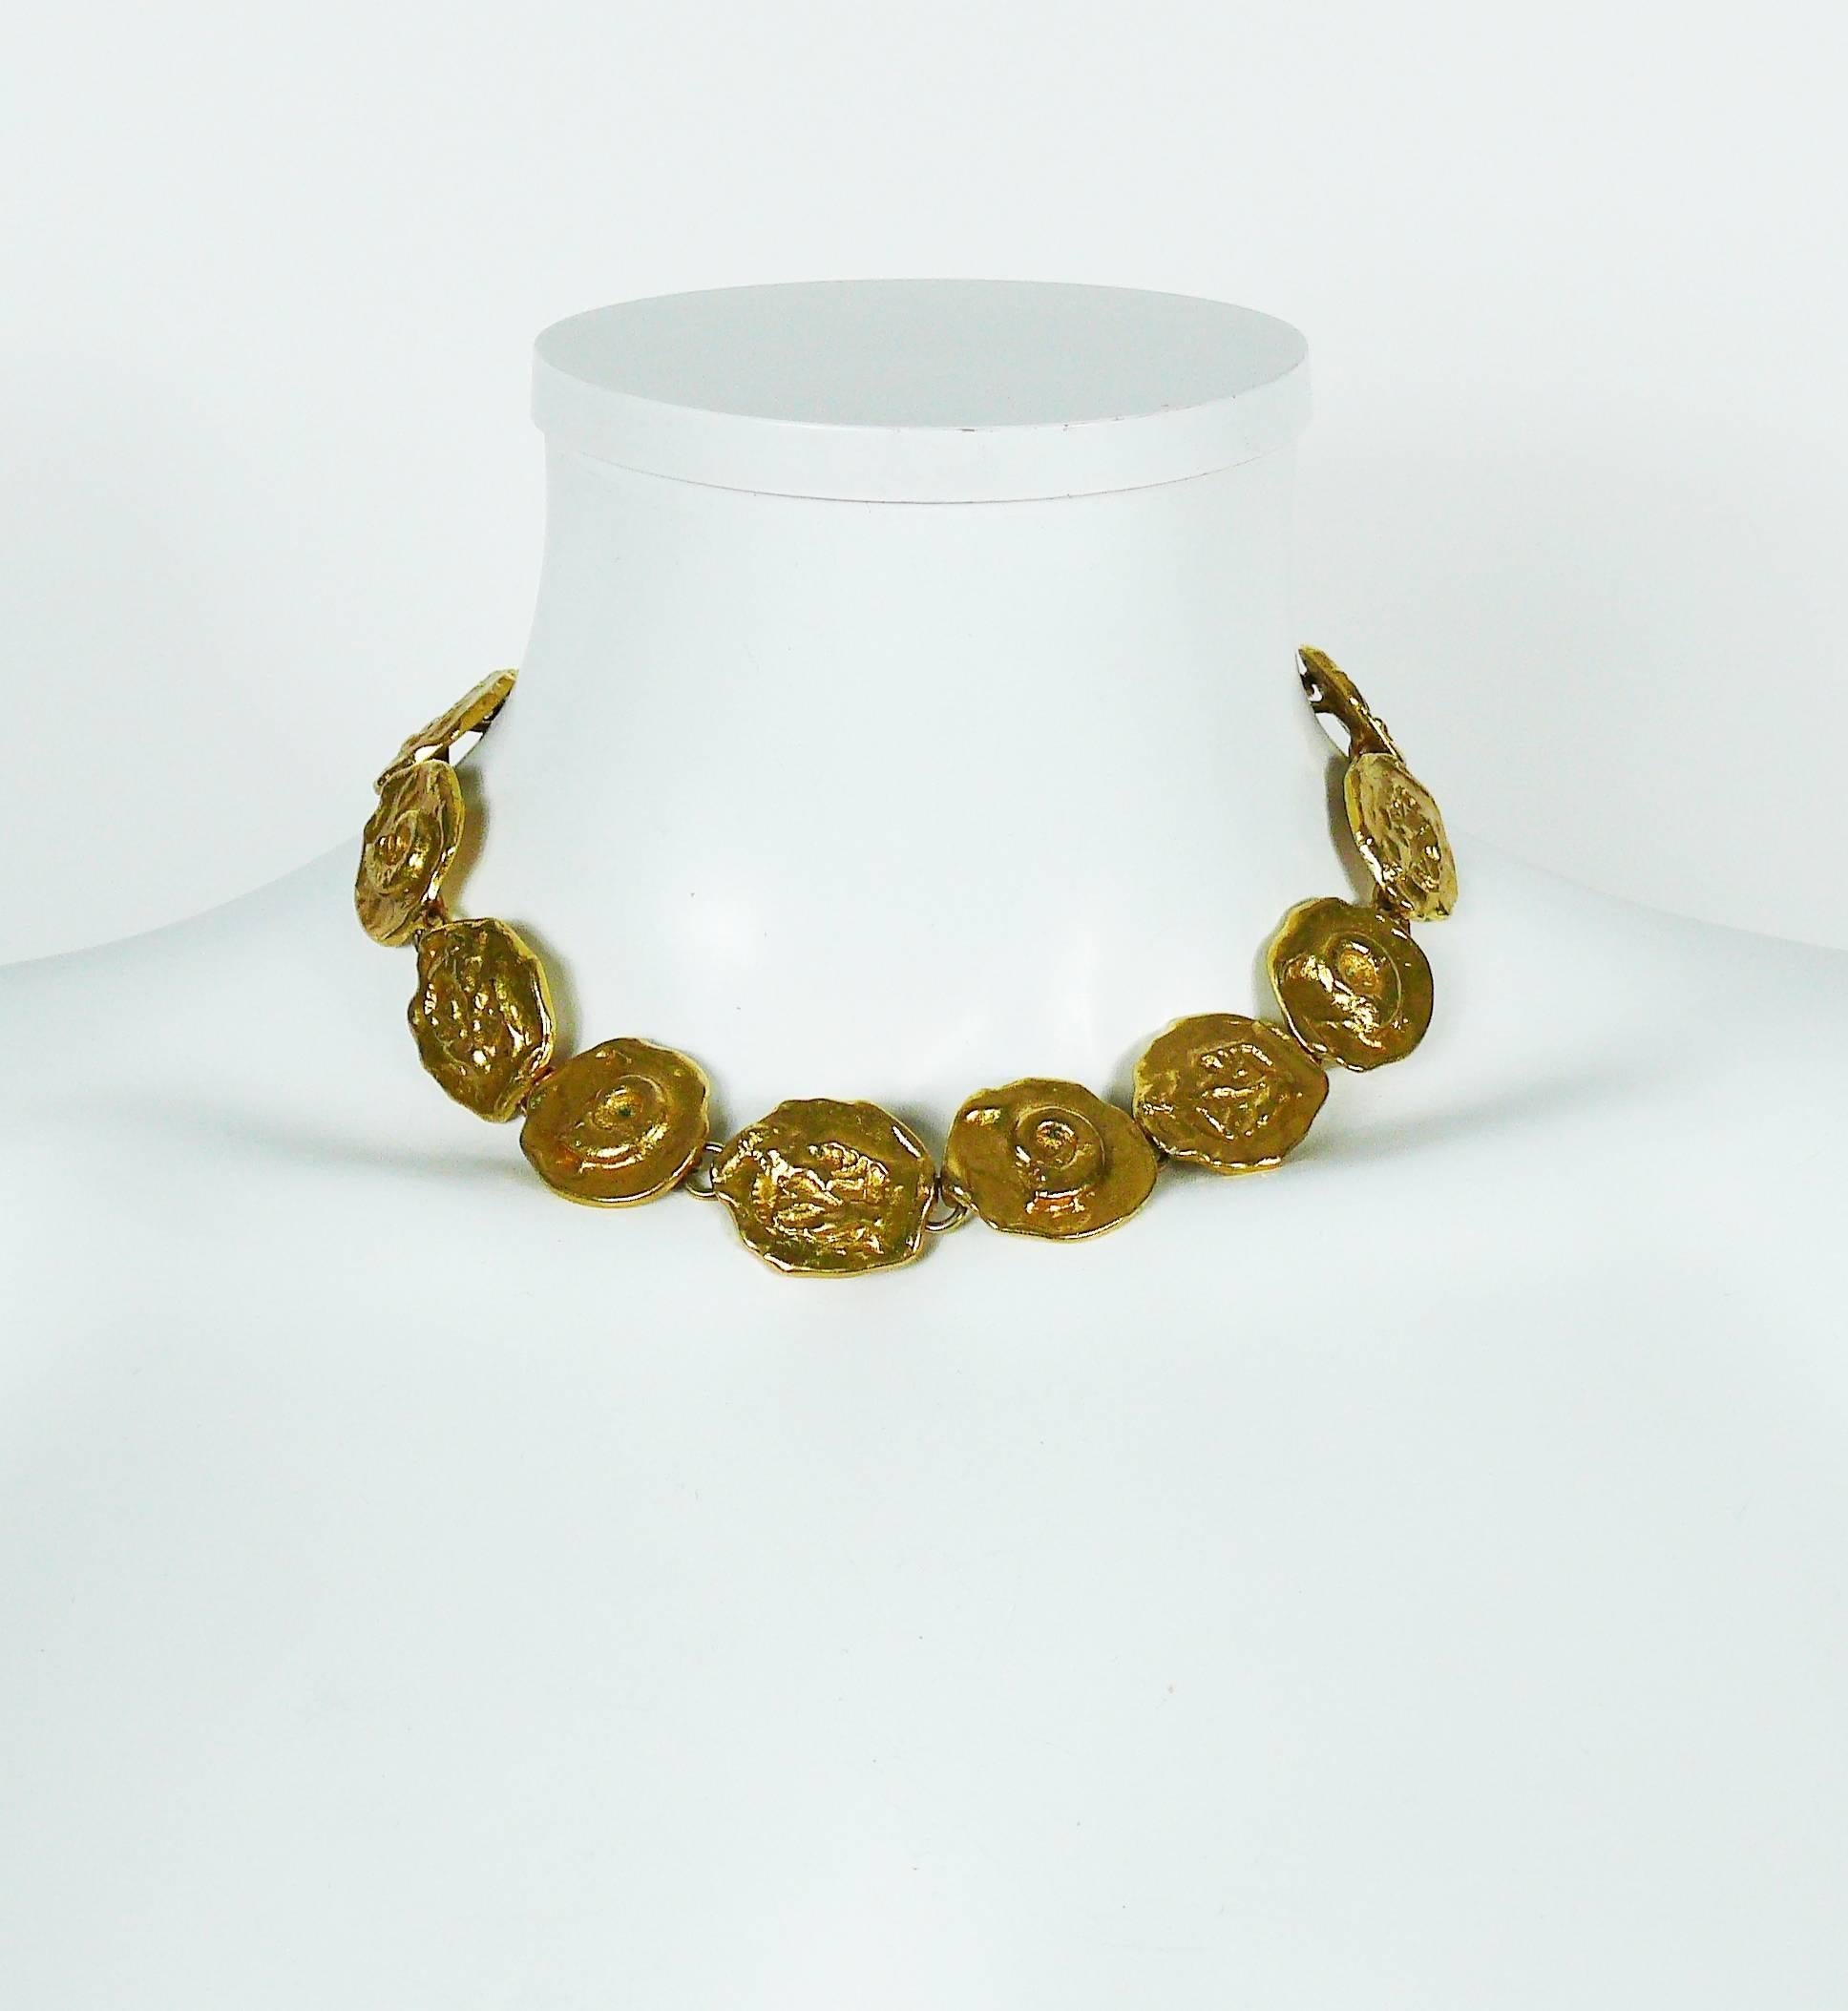 YVES SAINT LAURENT vintage rare and collectable gold toned necklace featuring fossil motif medallions.

Hook clasp closure.
Extension chain.

Indicative measurements : length from approx. 35.5 cm (13.98 inches) to approx. 39.5 cm (15.55 inches) /